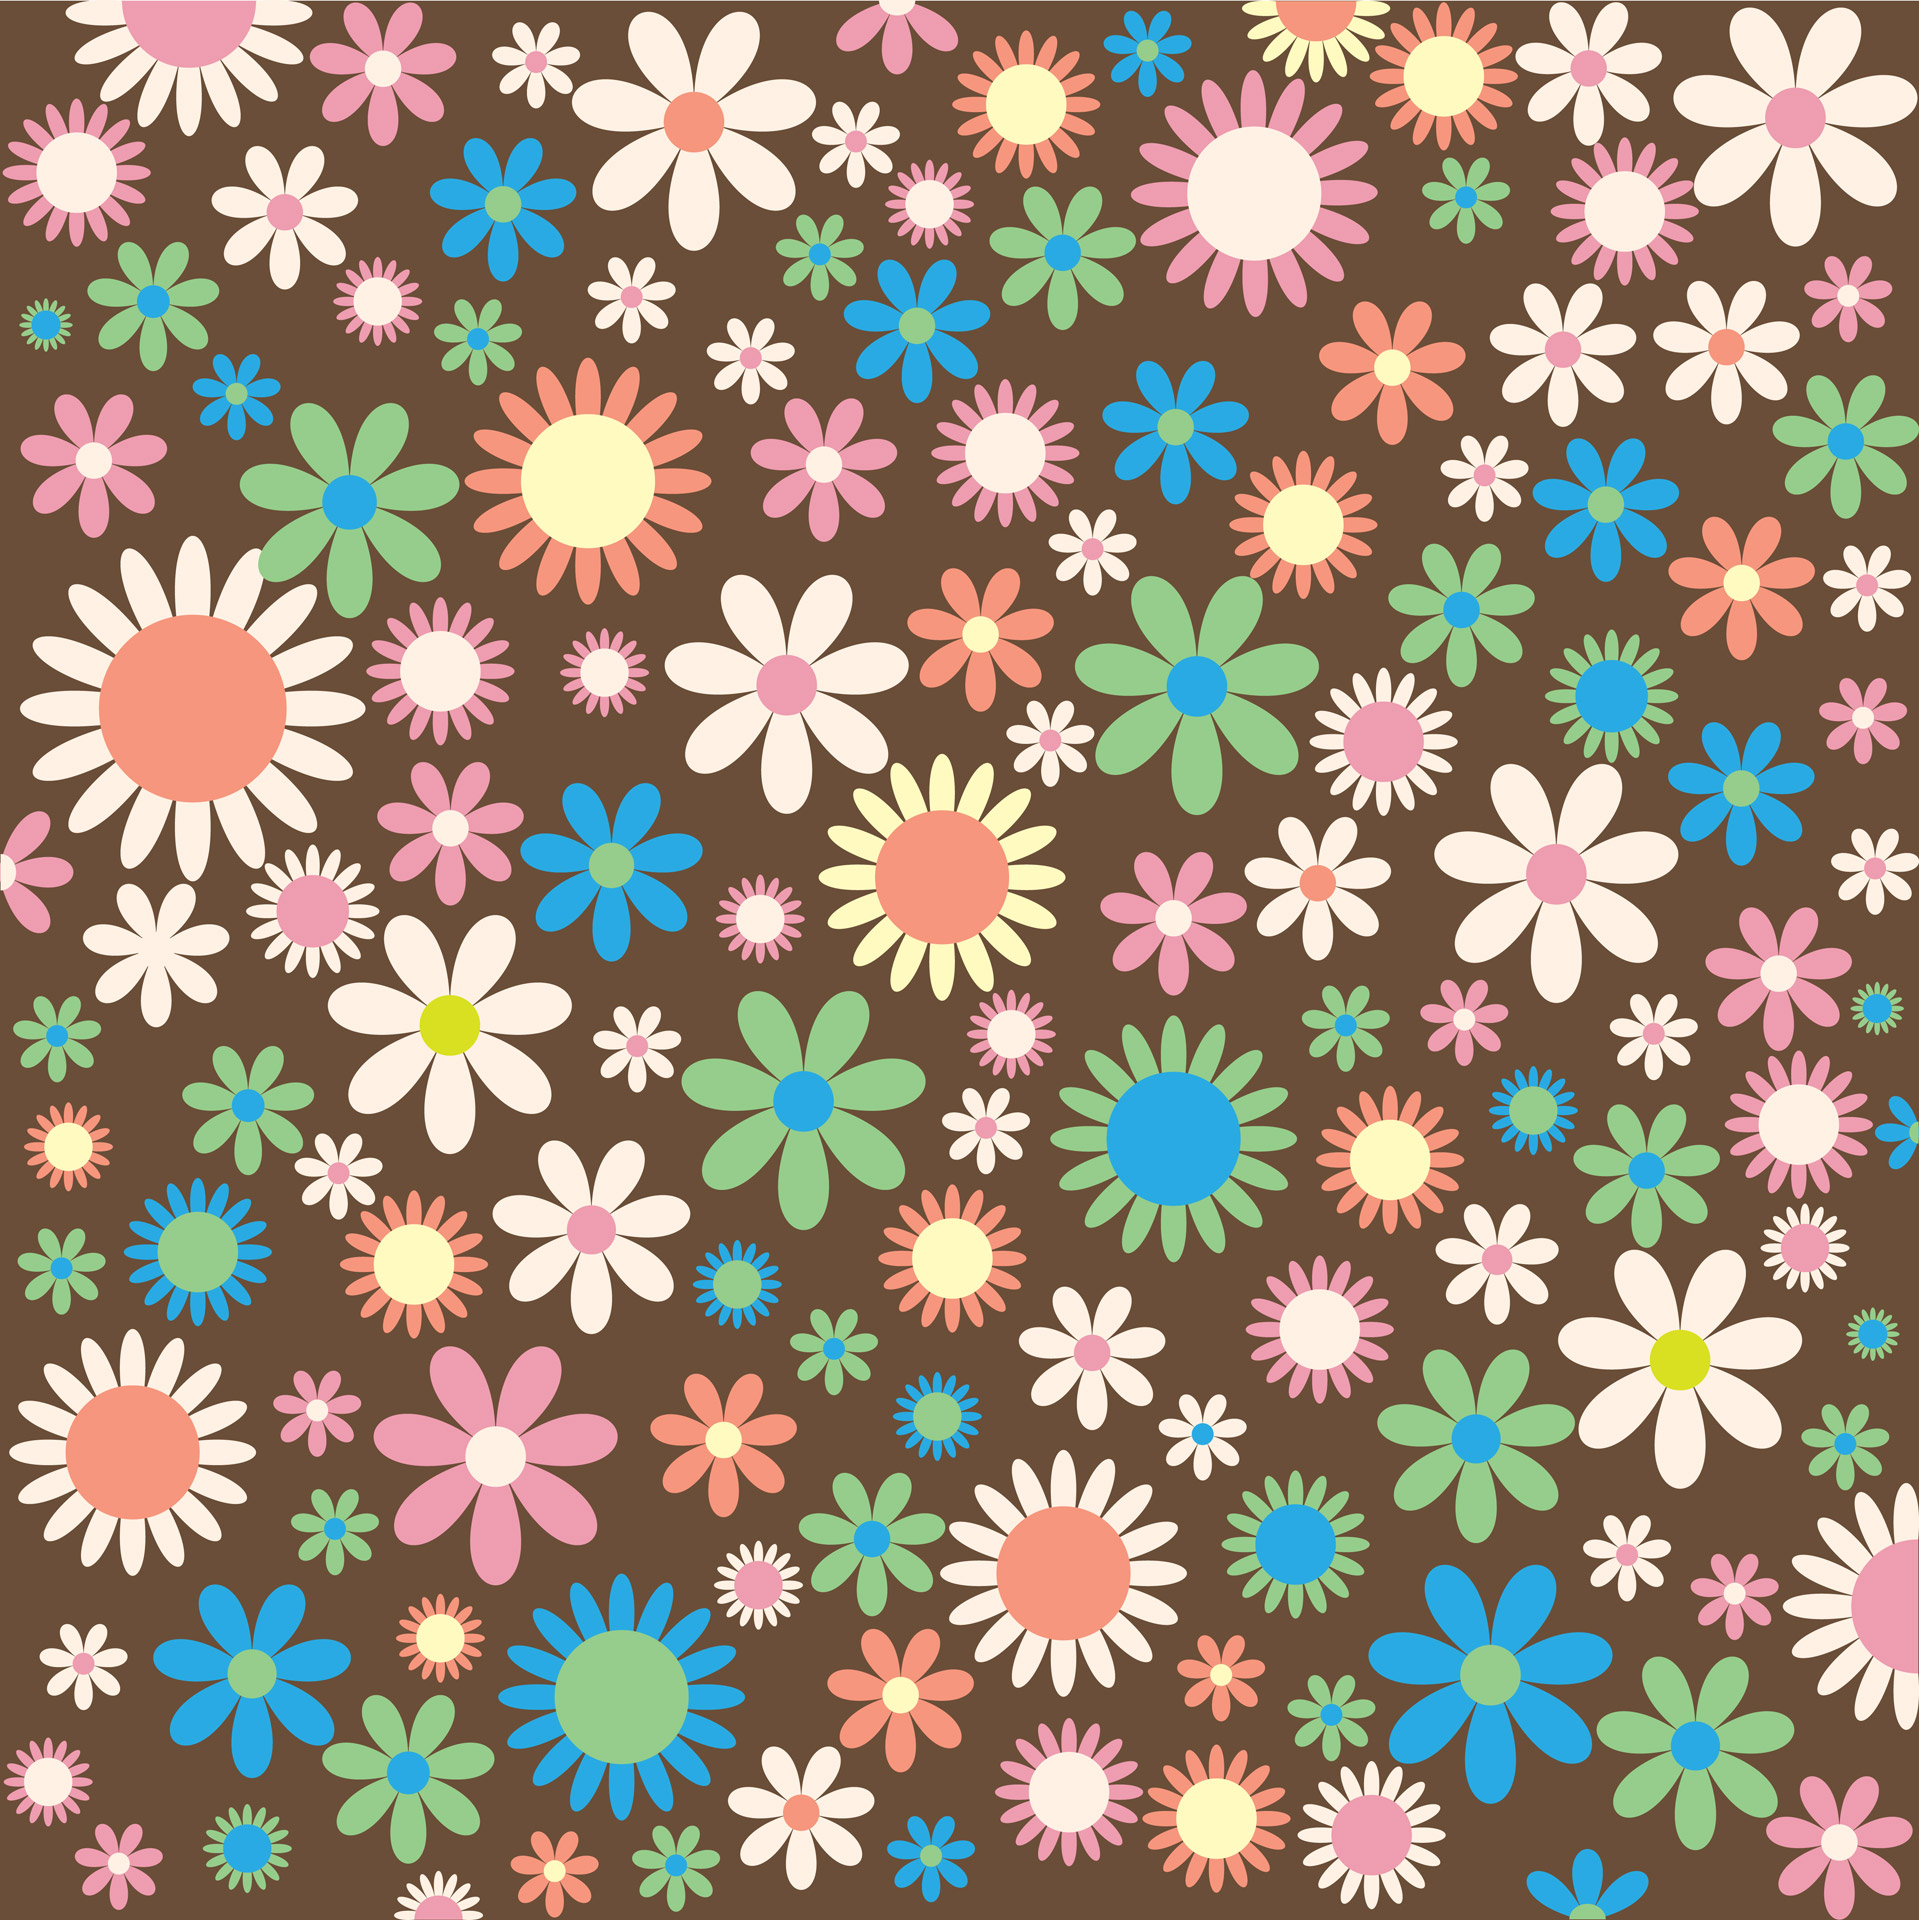 Funky, retro floral flowers background wallpaper